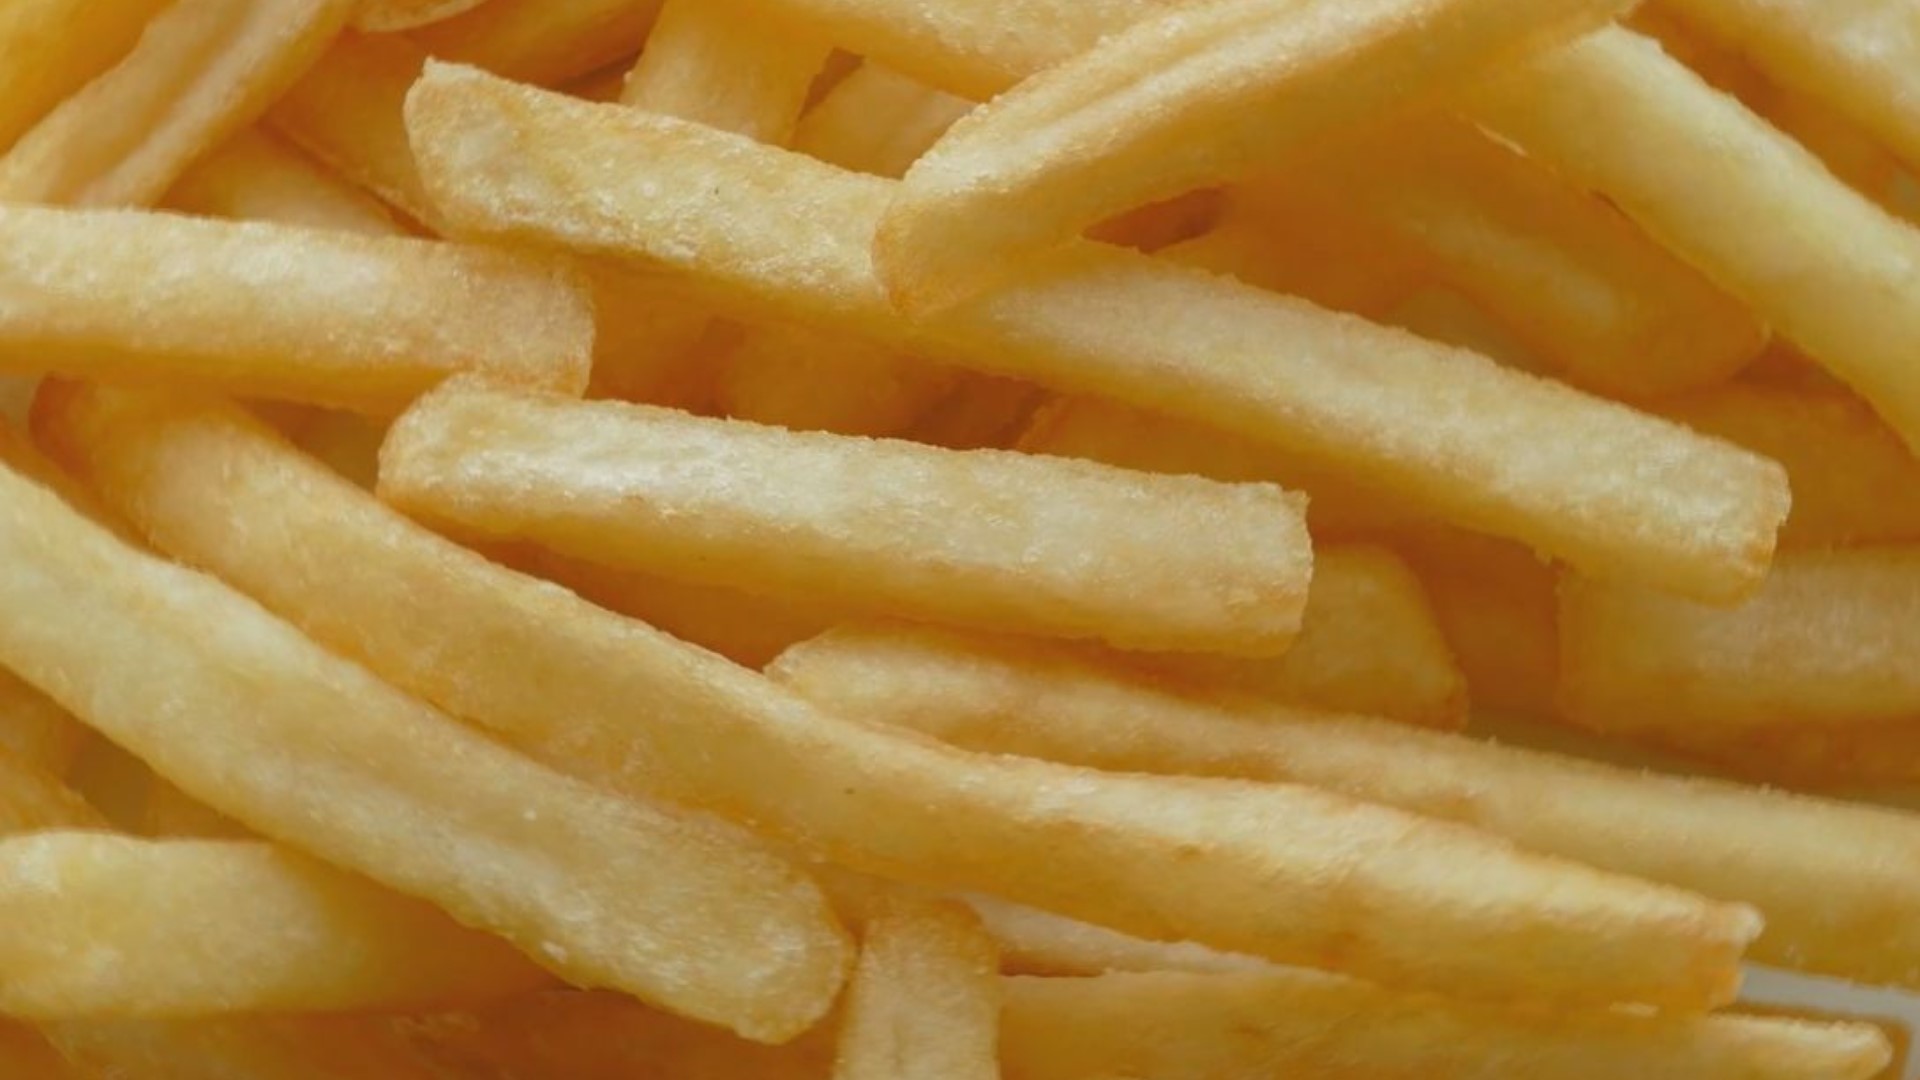 Exercise? We thought you said extra fries!